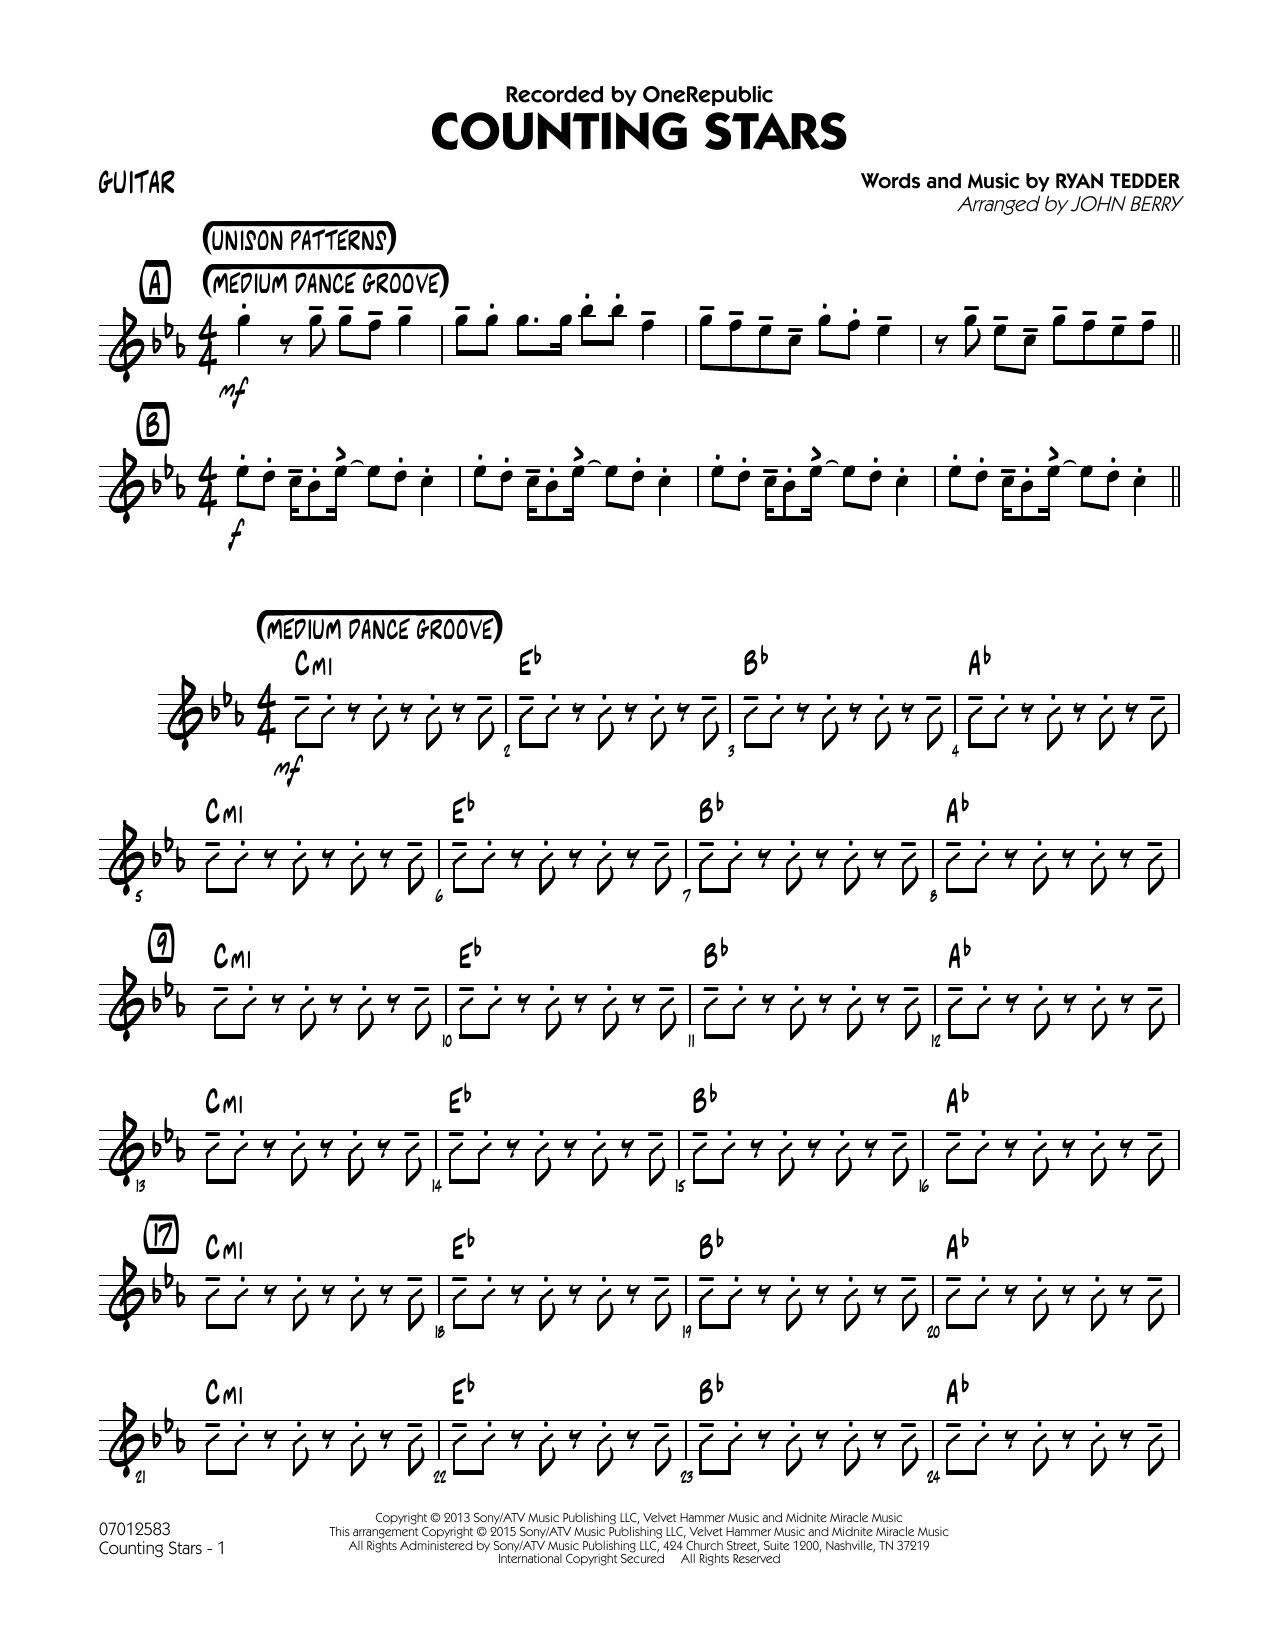 John Berry Counting Stars - Guitar sheet music notes and chords. Download Printable PDF.